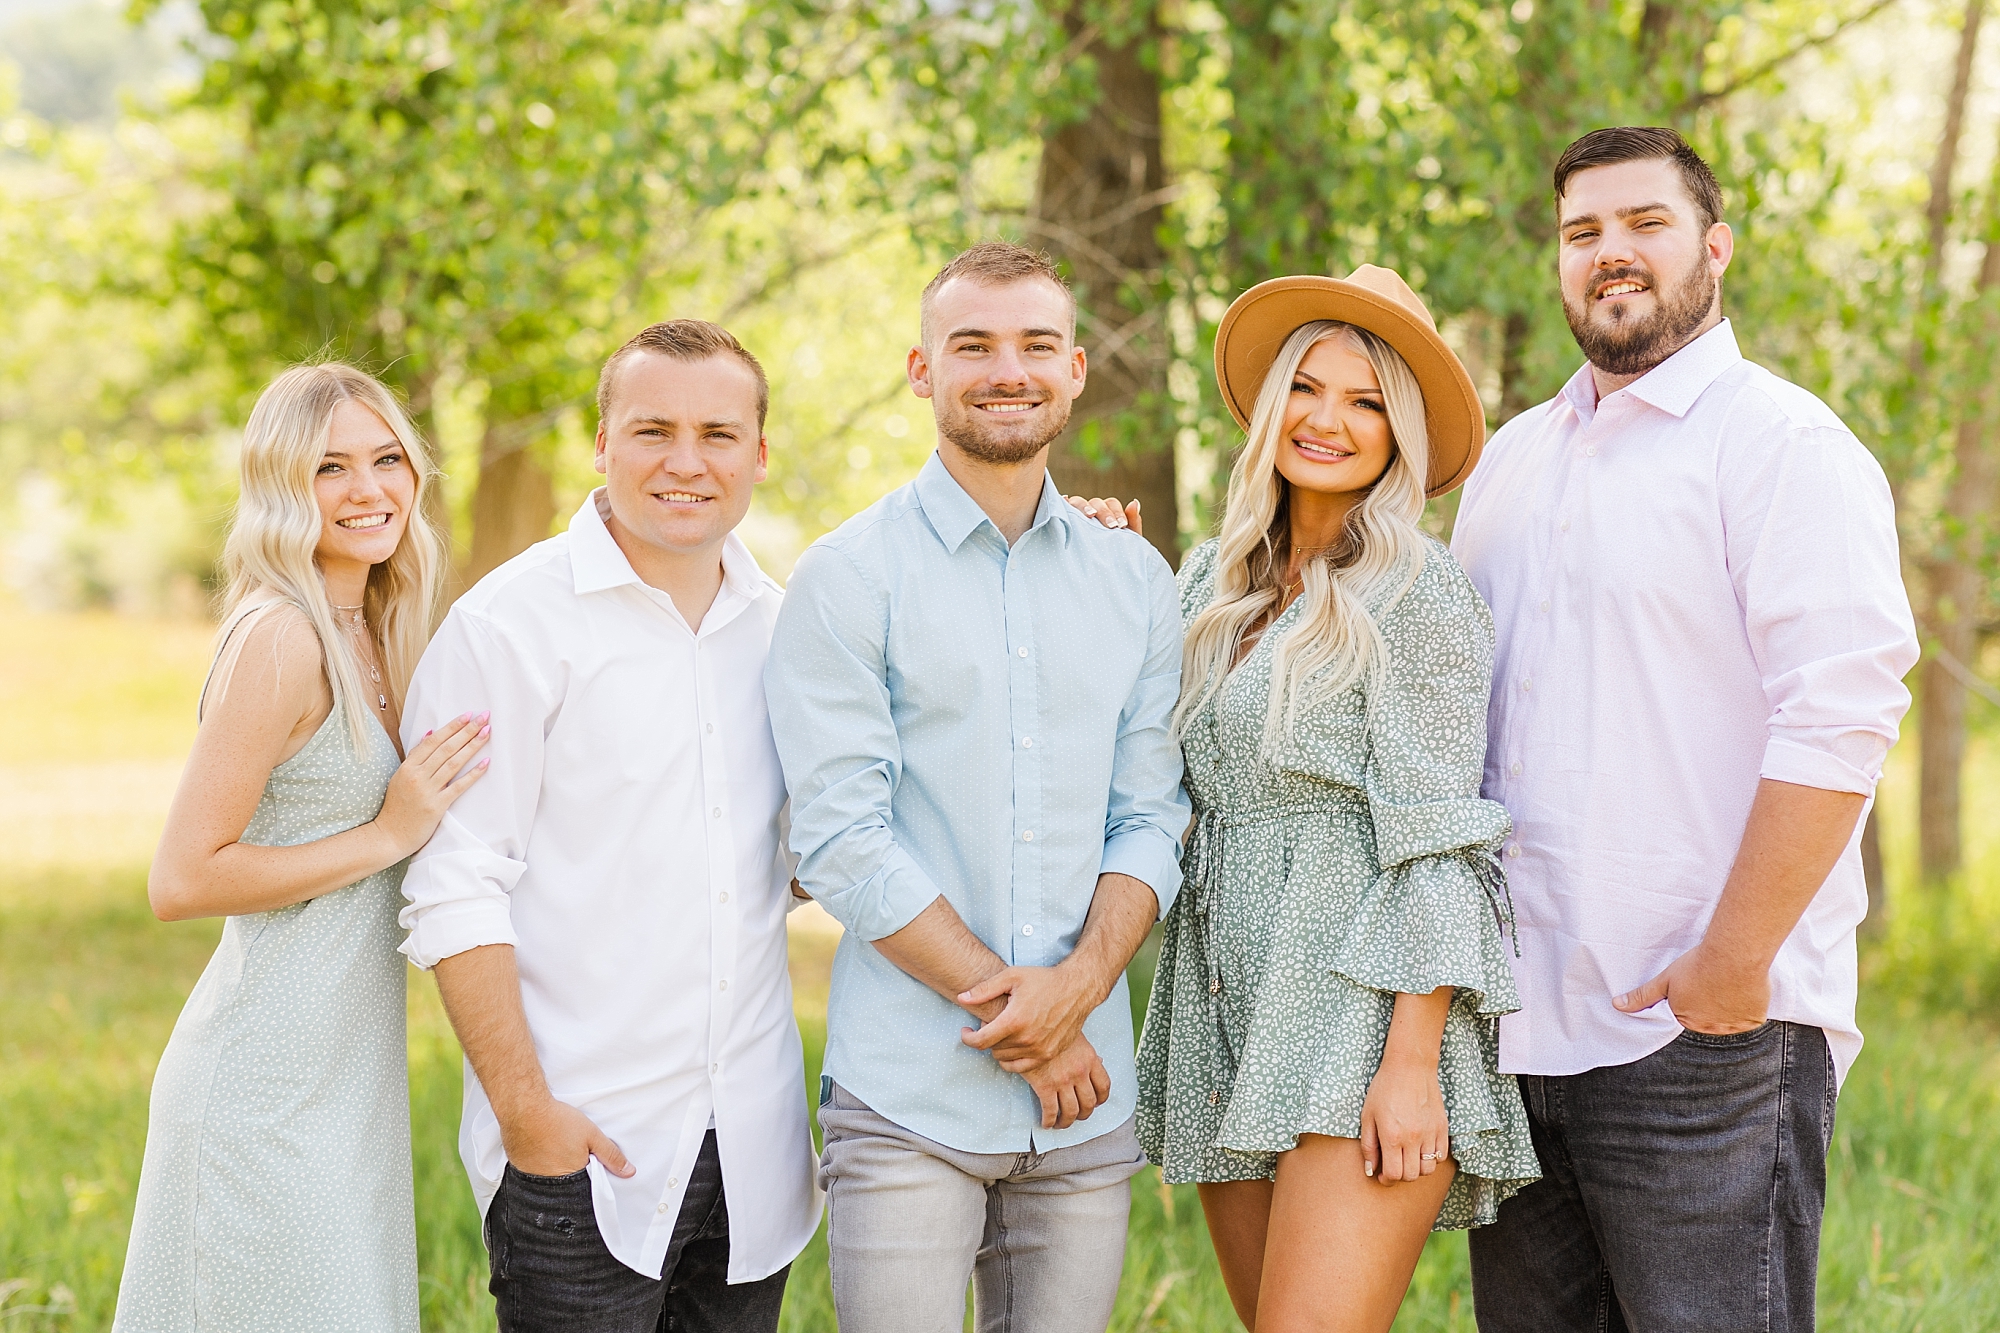 Coordinating your extended family for family photos